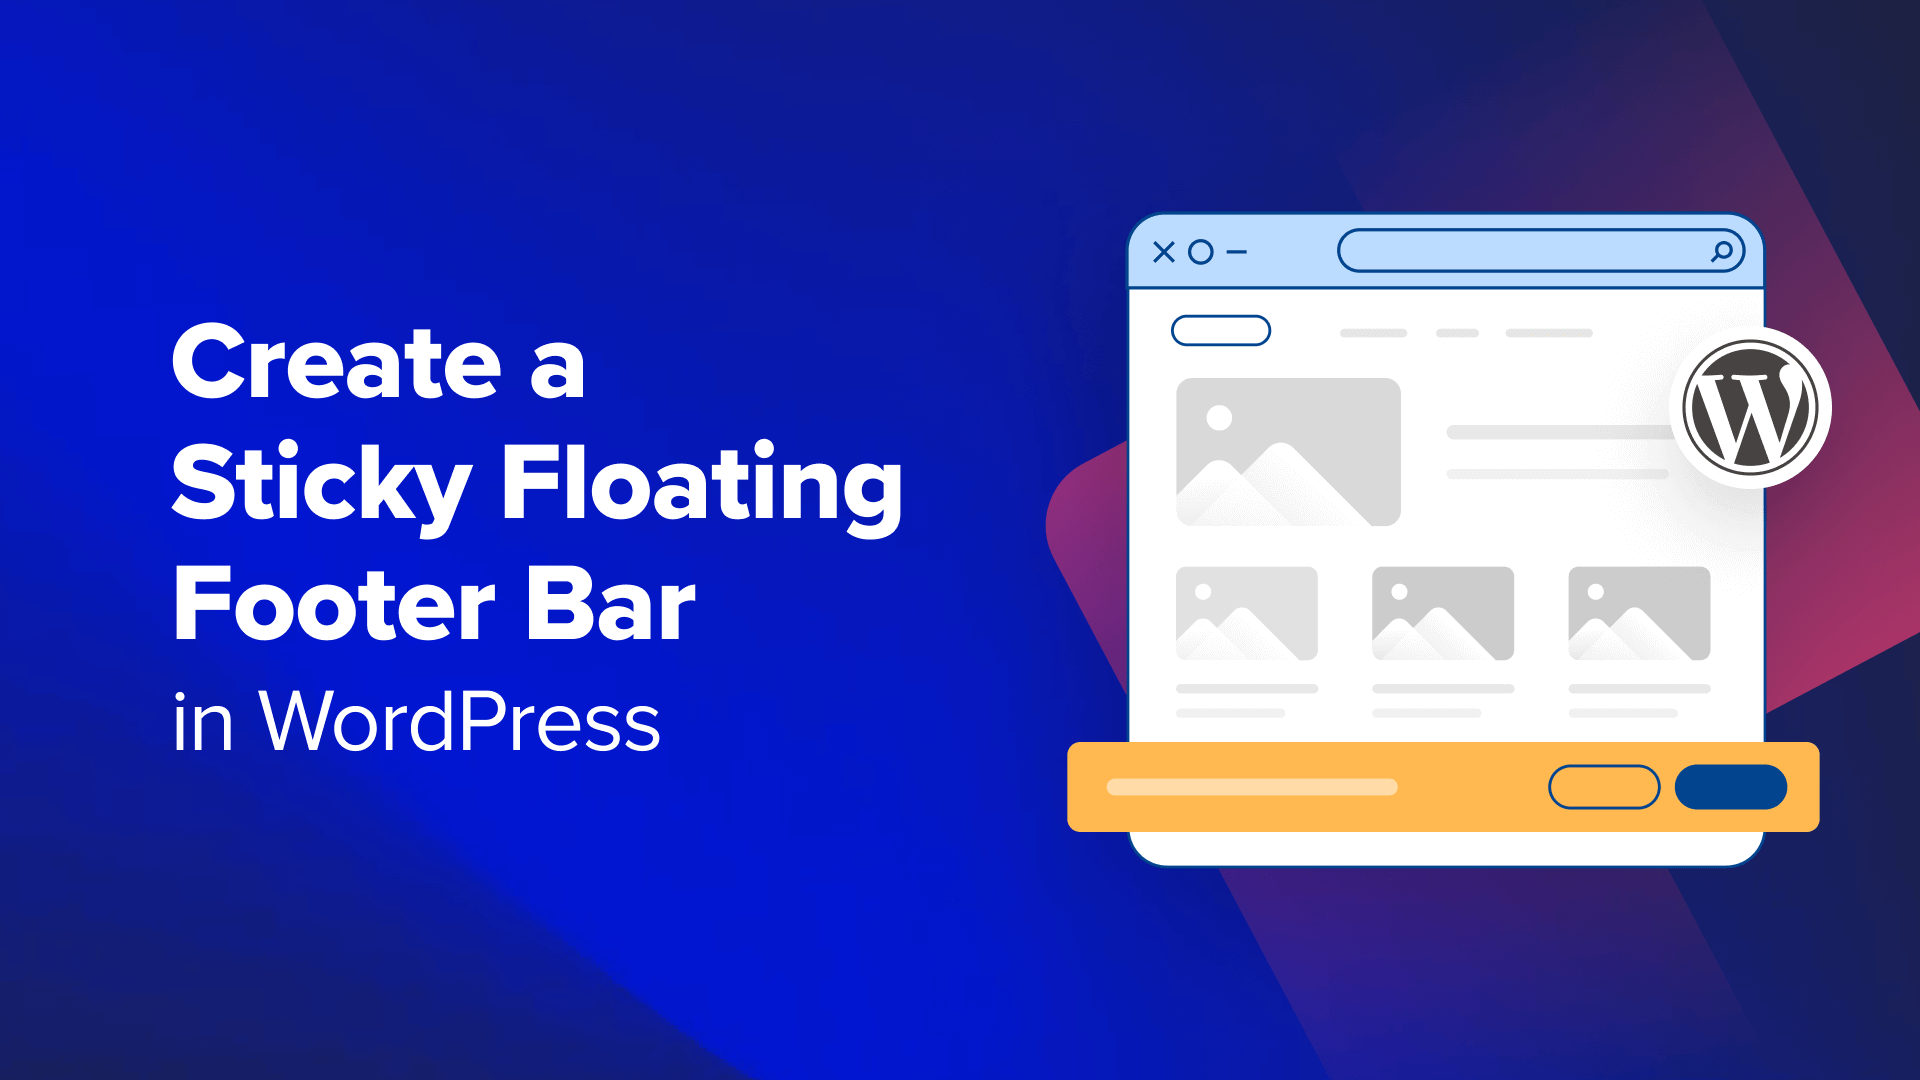 How to Create a "Sticky" Floating Footer Bar in WordPress